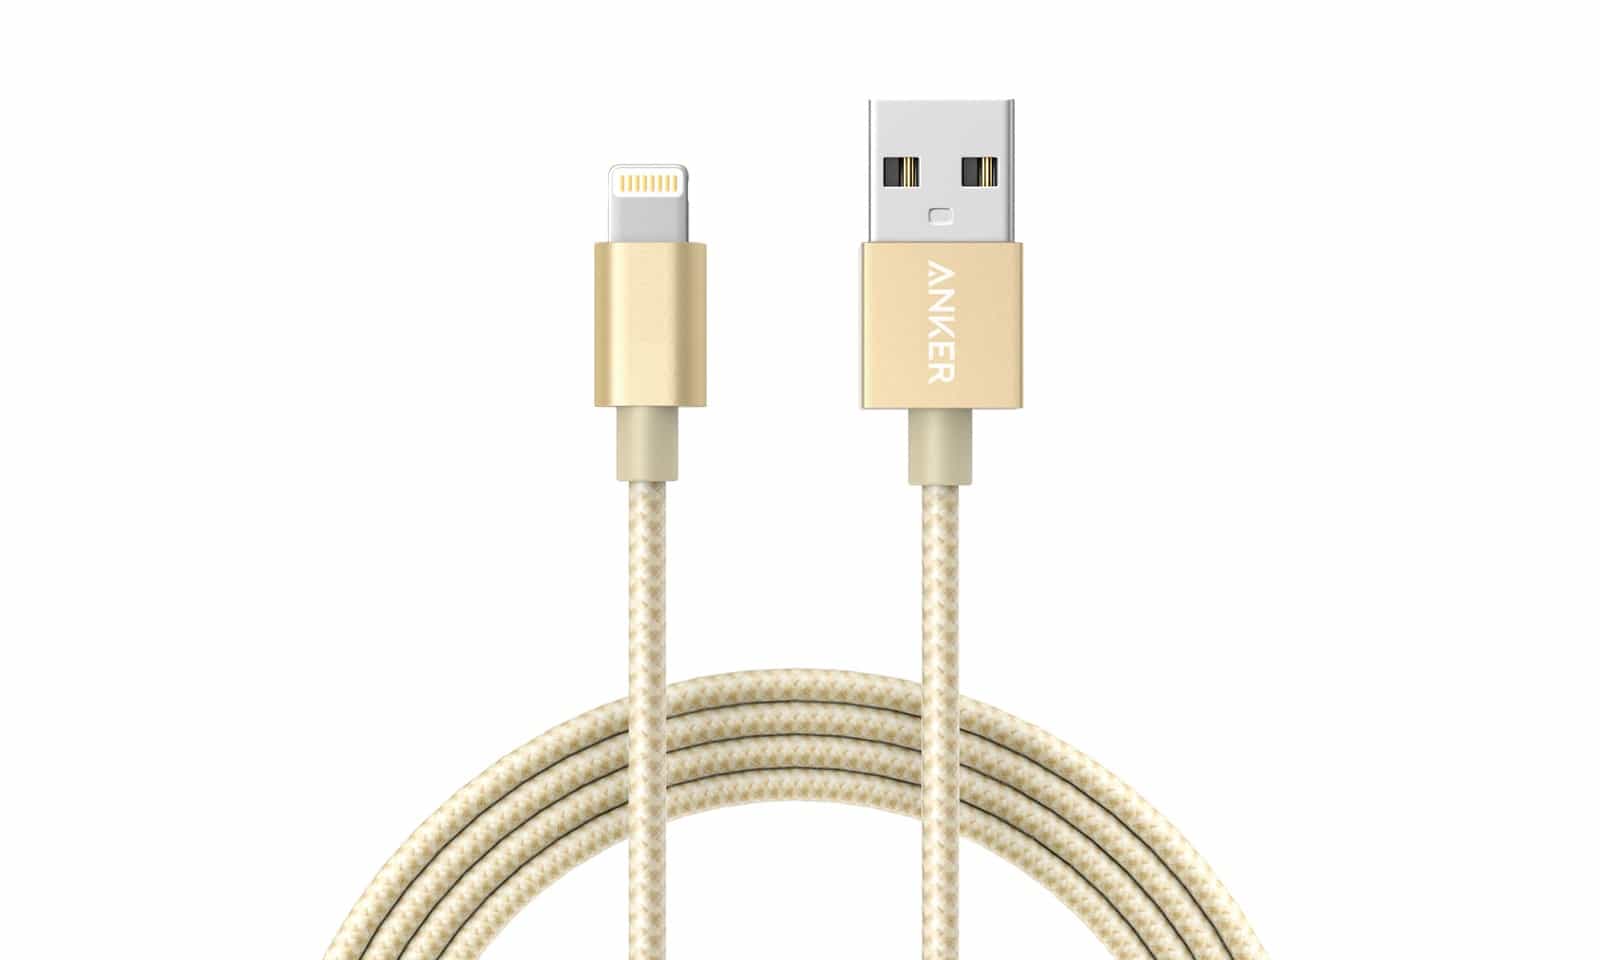 Best Lightning cable: Anker 6-foot Apple MFi-certified gold cable